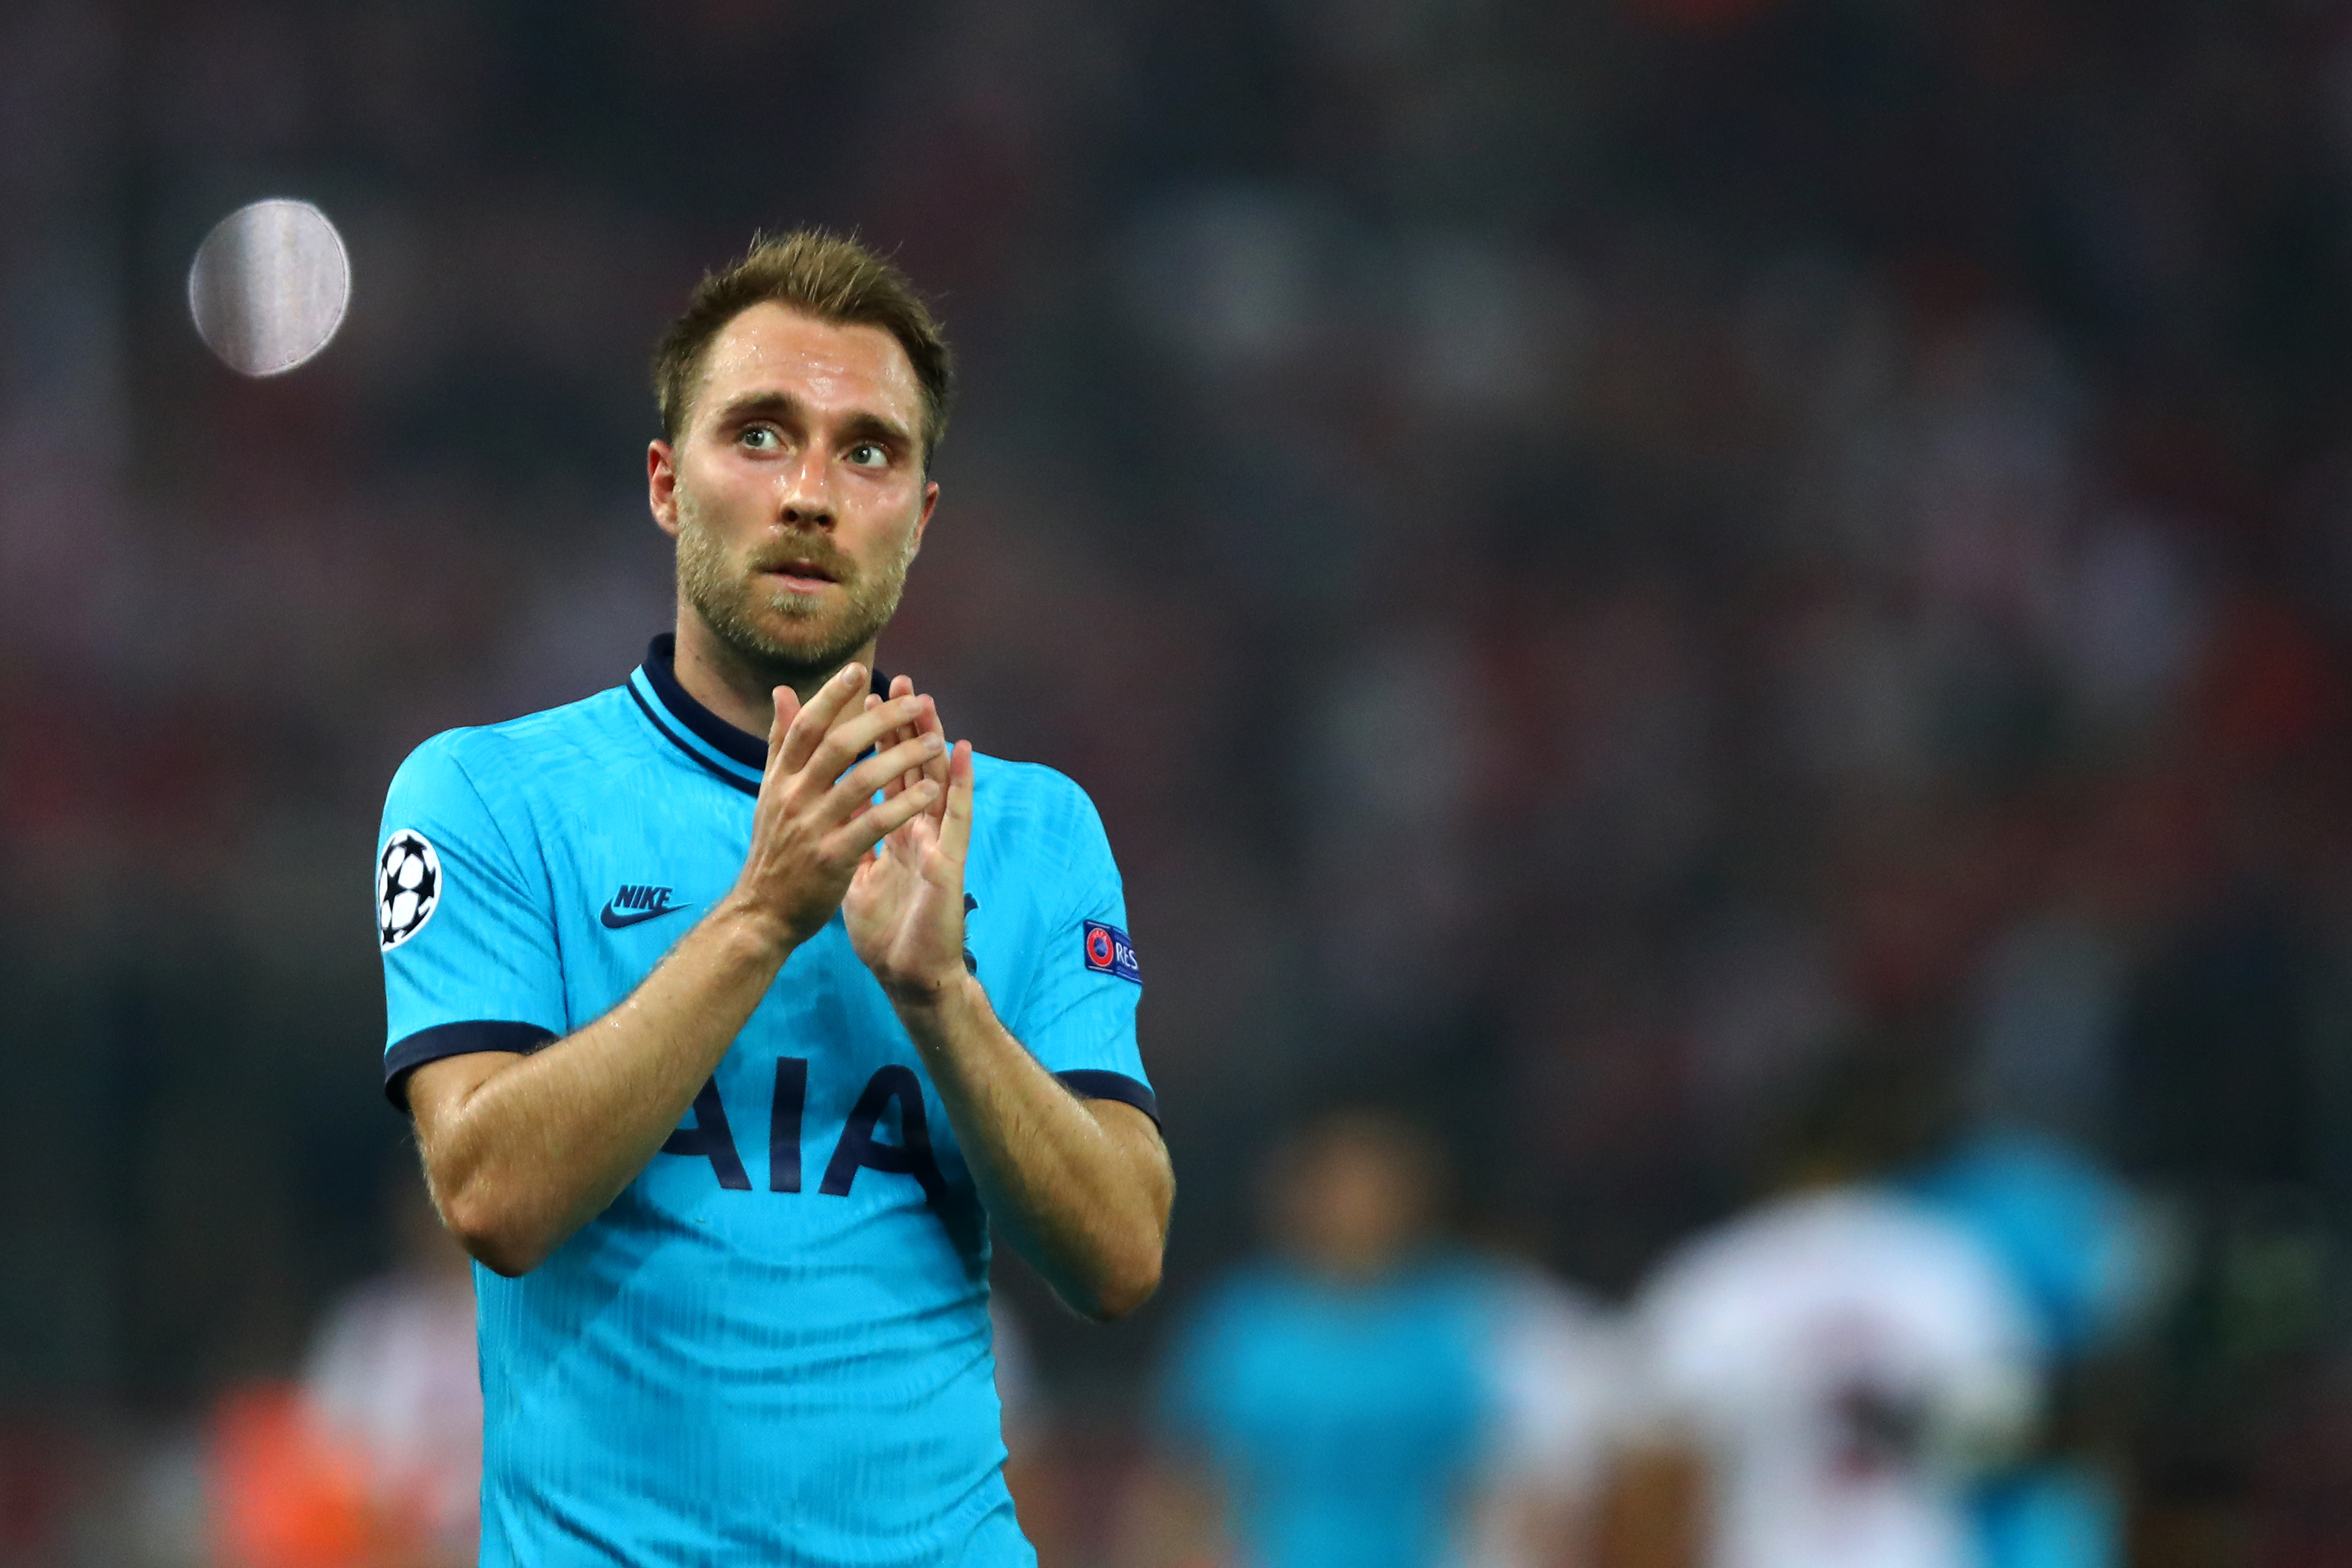 Where next for Christian Eriksen? (Photo by Dean Mouhtaropoulos/Getty Images)